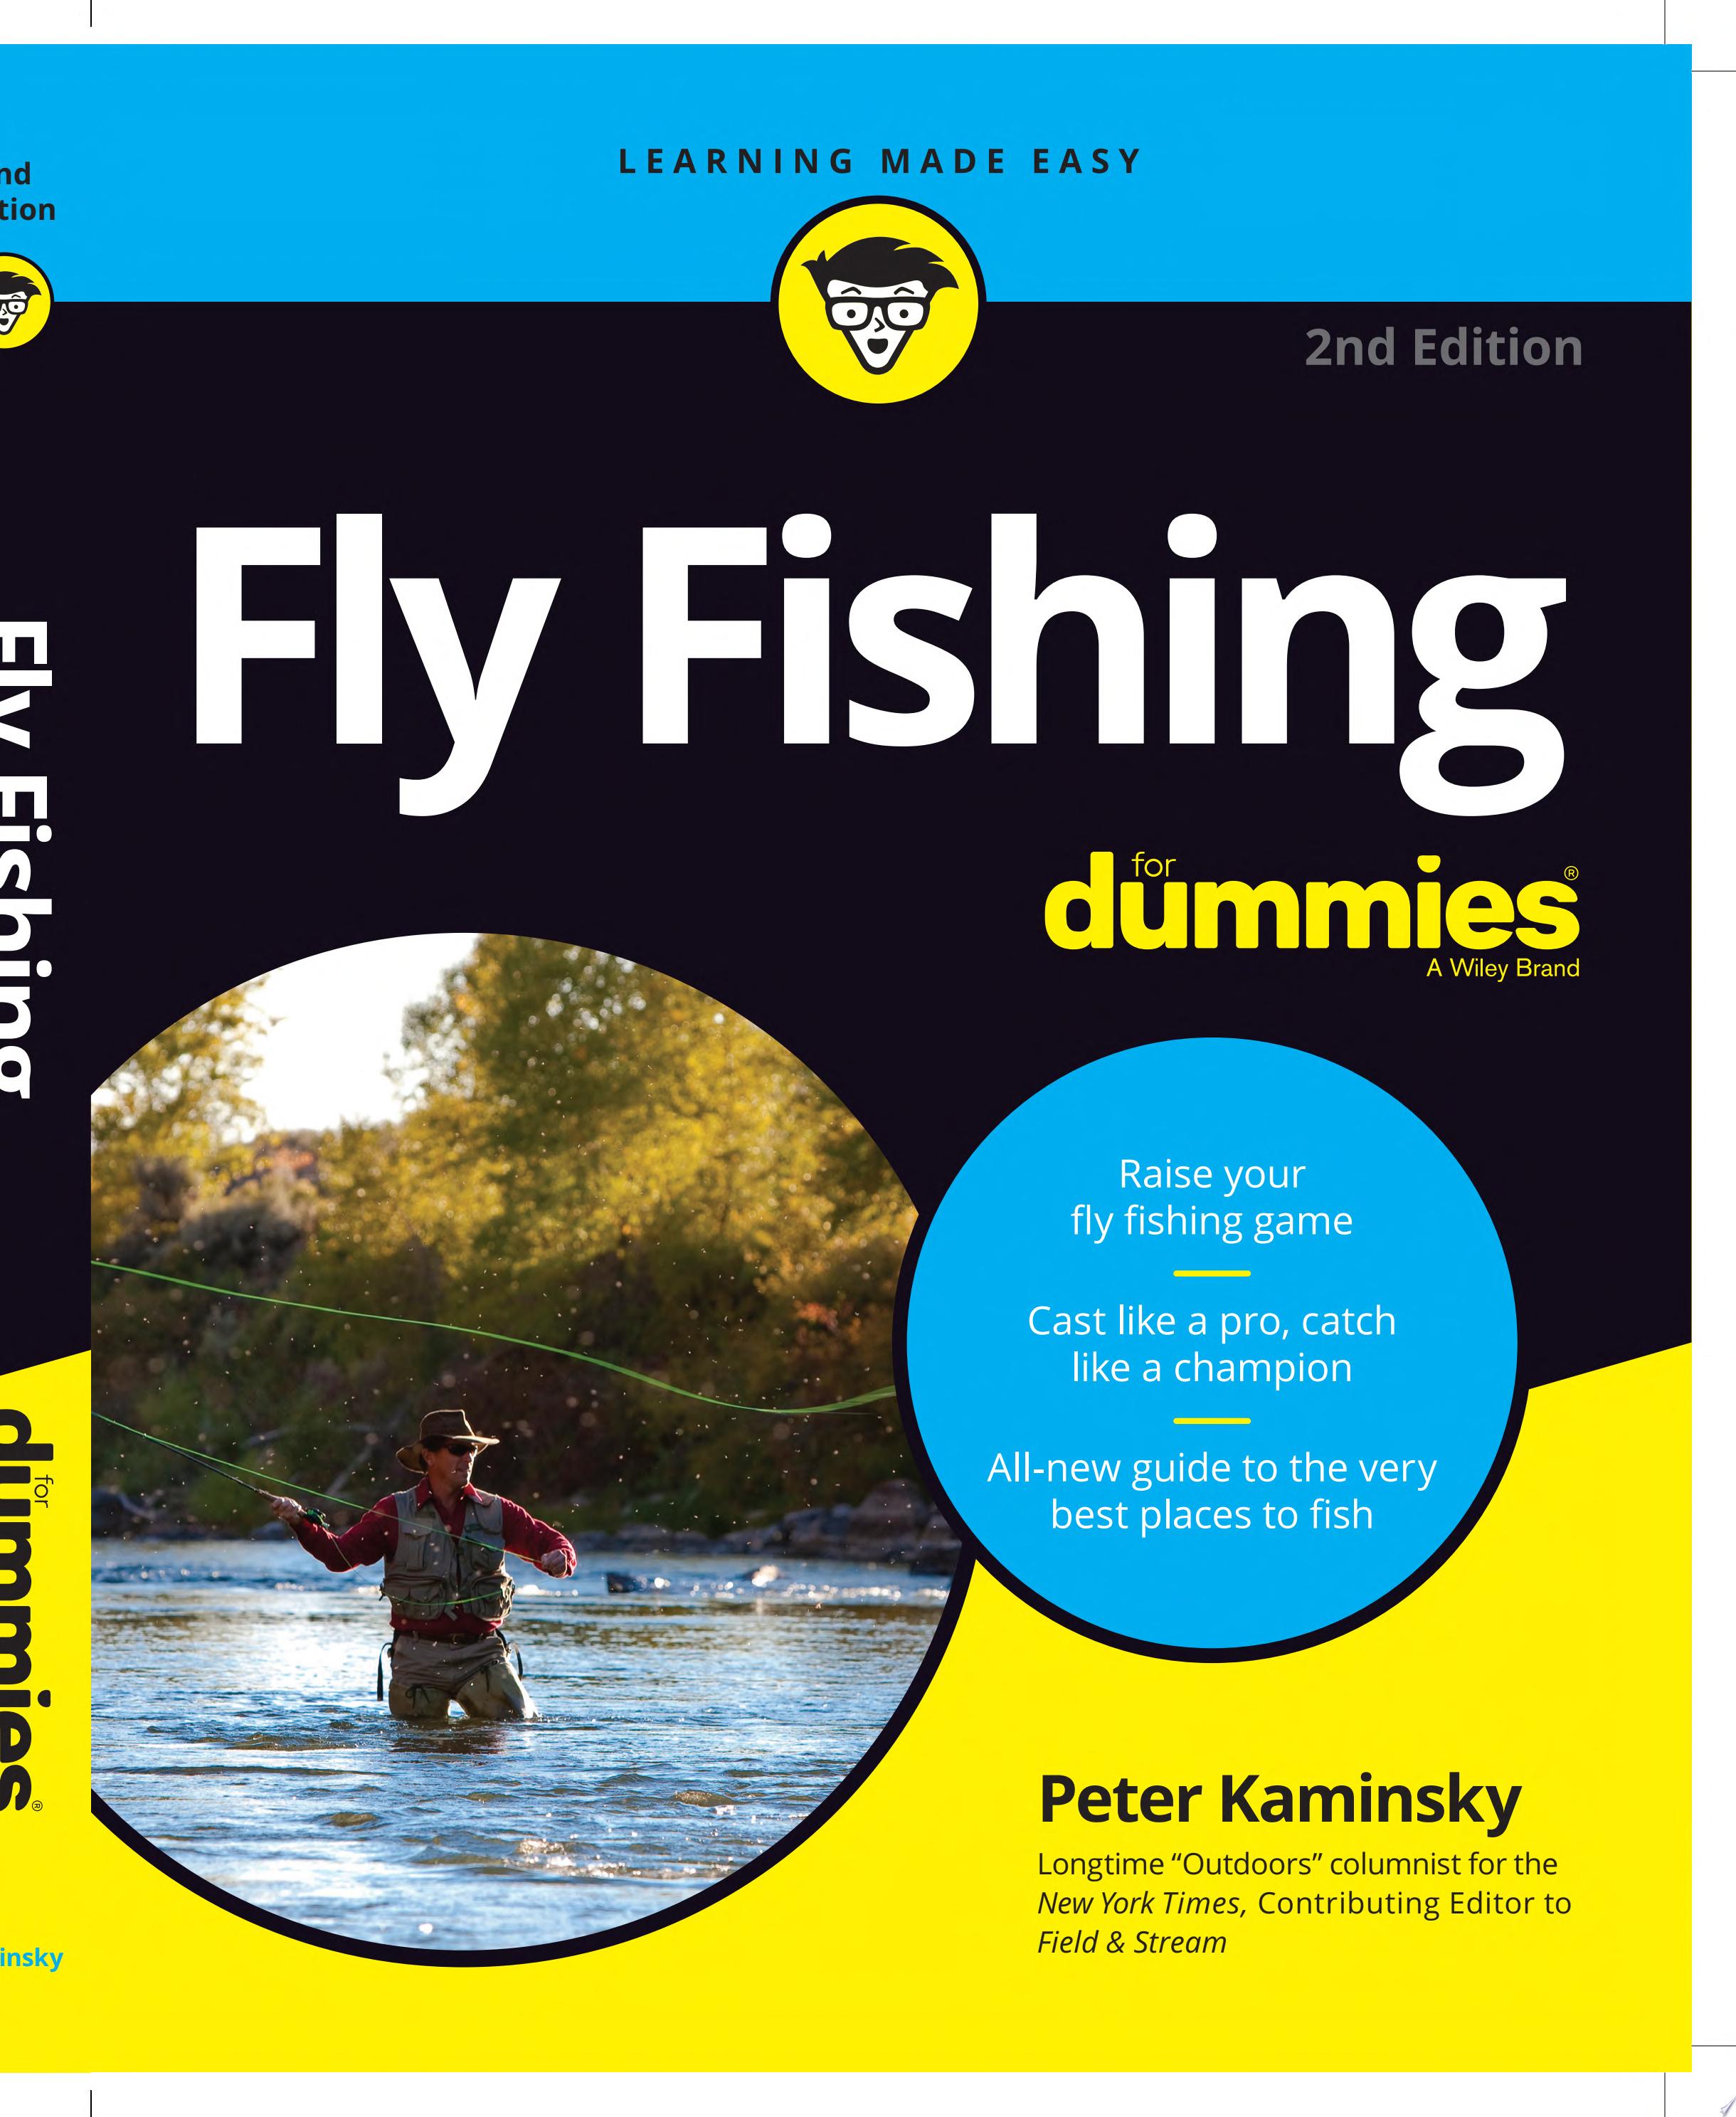 Image for "Fly Fishing For Dummies"